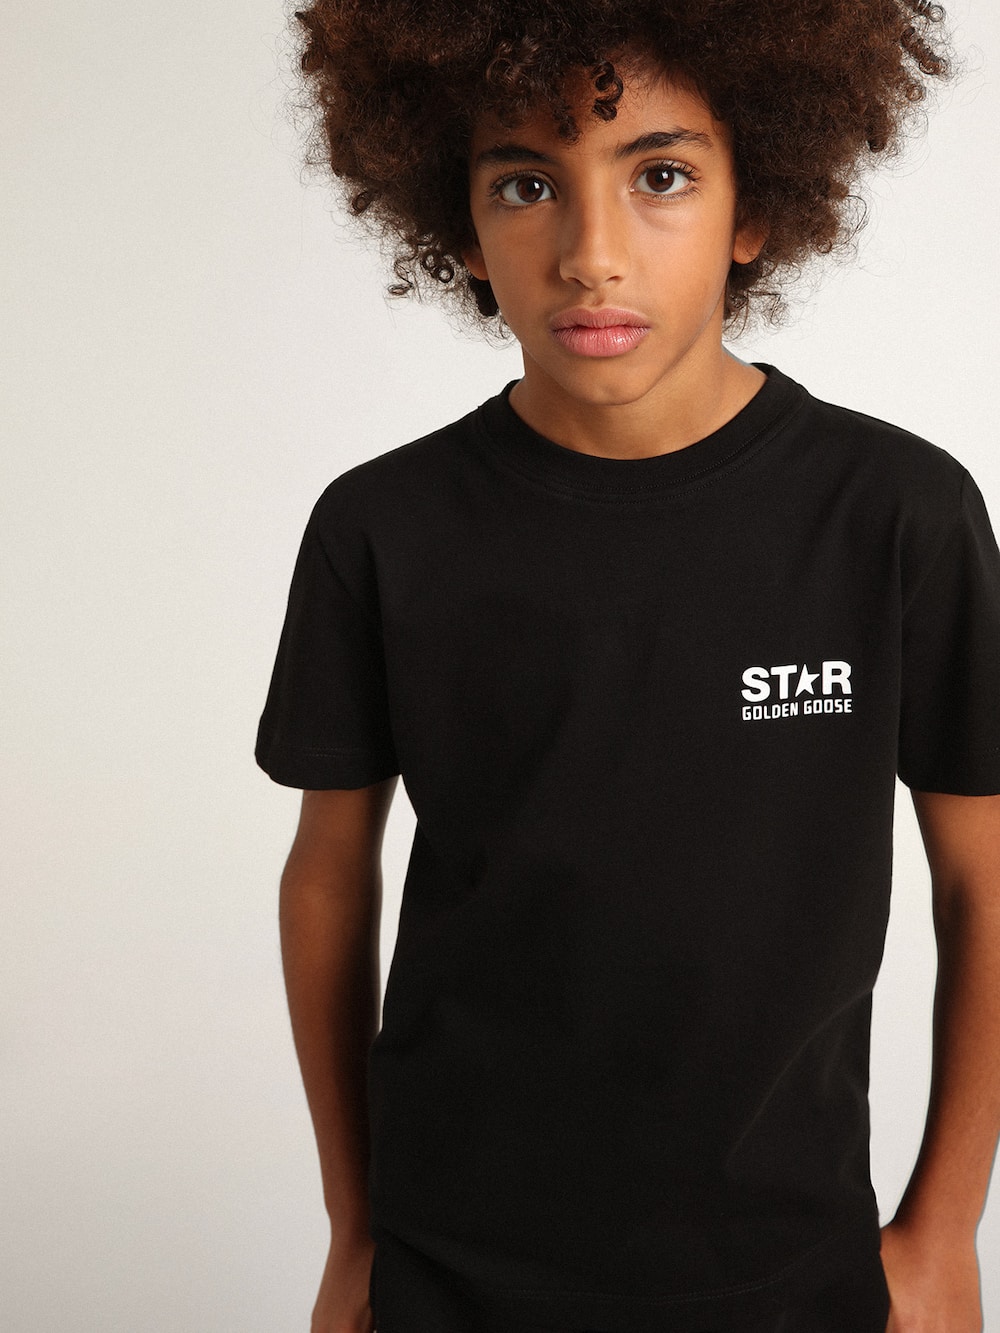 Golden Goose - Black T-shirt with contrasting white logo on the front and maxi star on the back in 